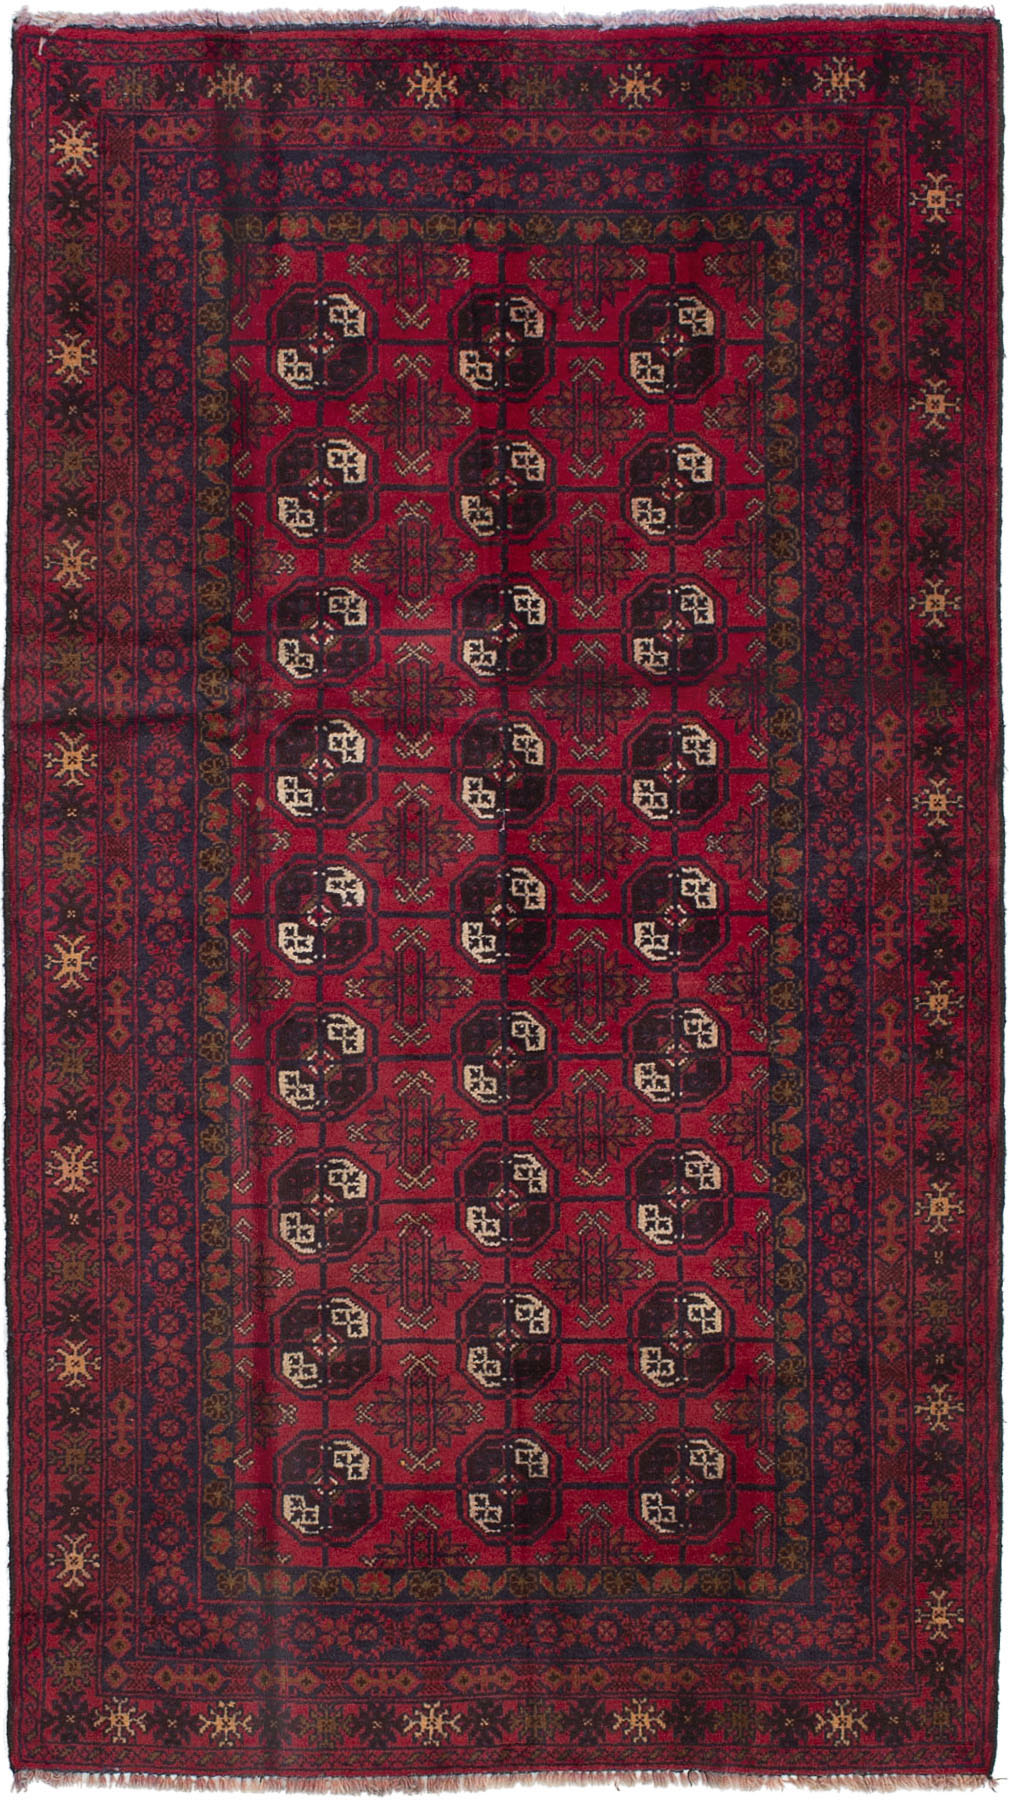 Hand-knotted Teimani Red Wool Rug 3'6" x 6'5"  Size: 3'6" x 6'5"  